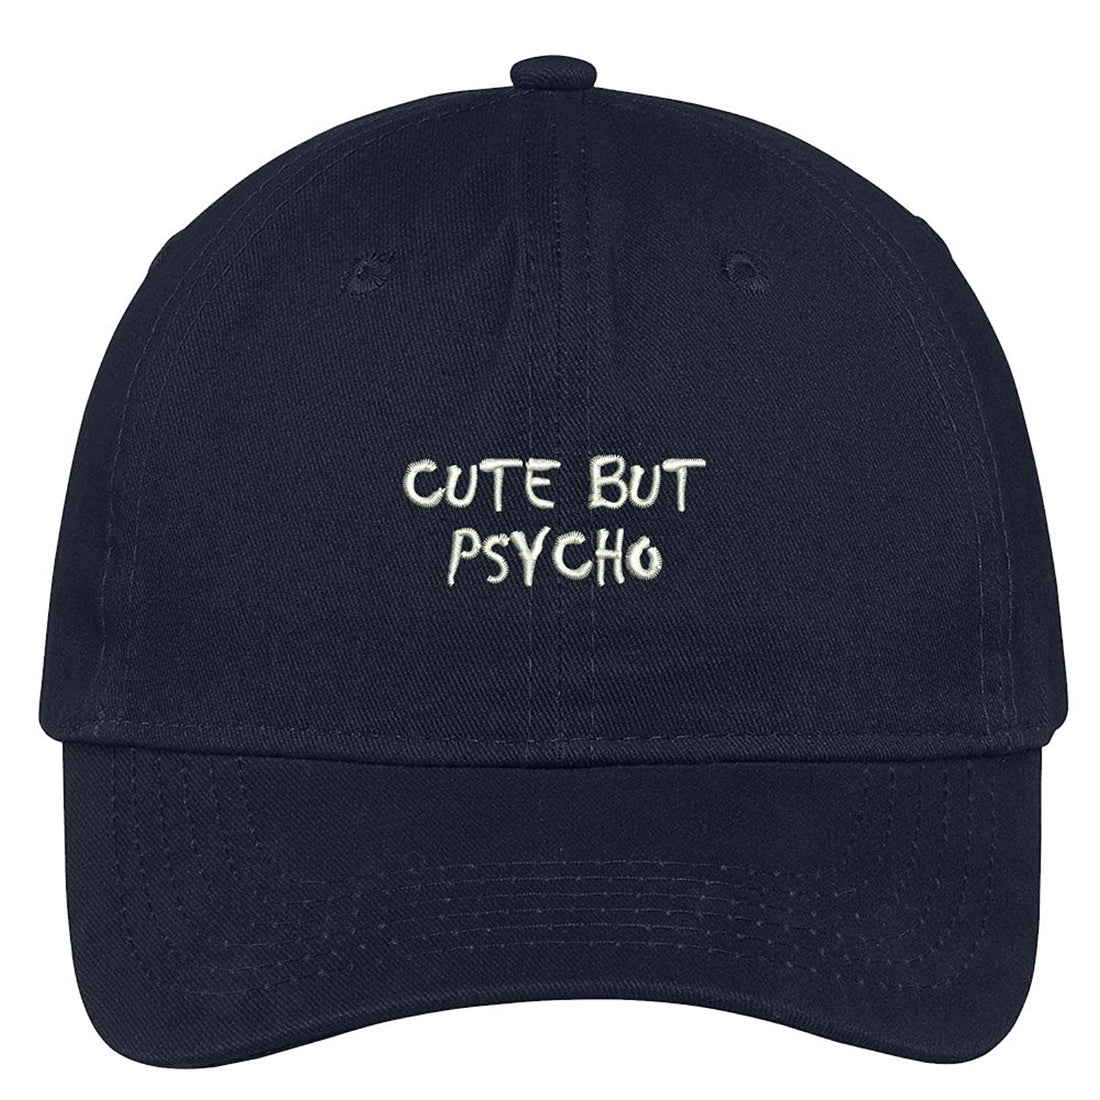 Trendy Apparel Shop Cute But Psycho Small Embroidered Adjustable Cotton Cap